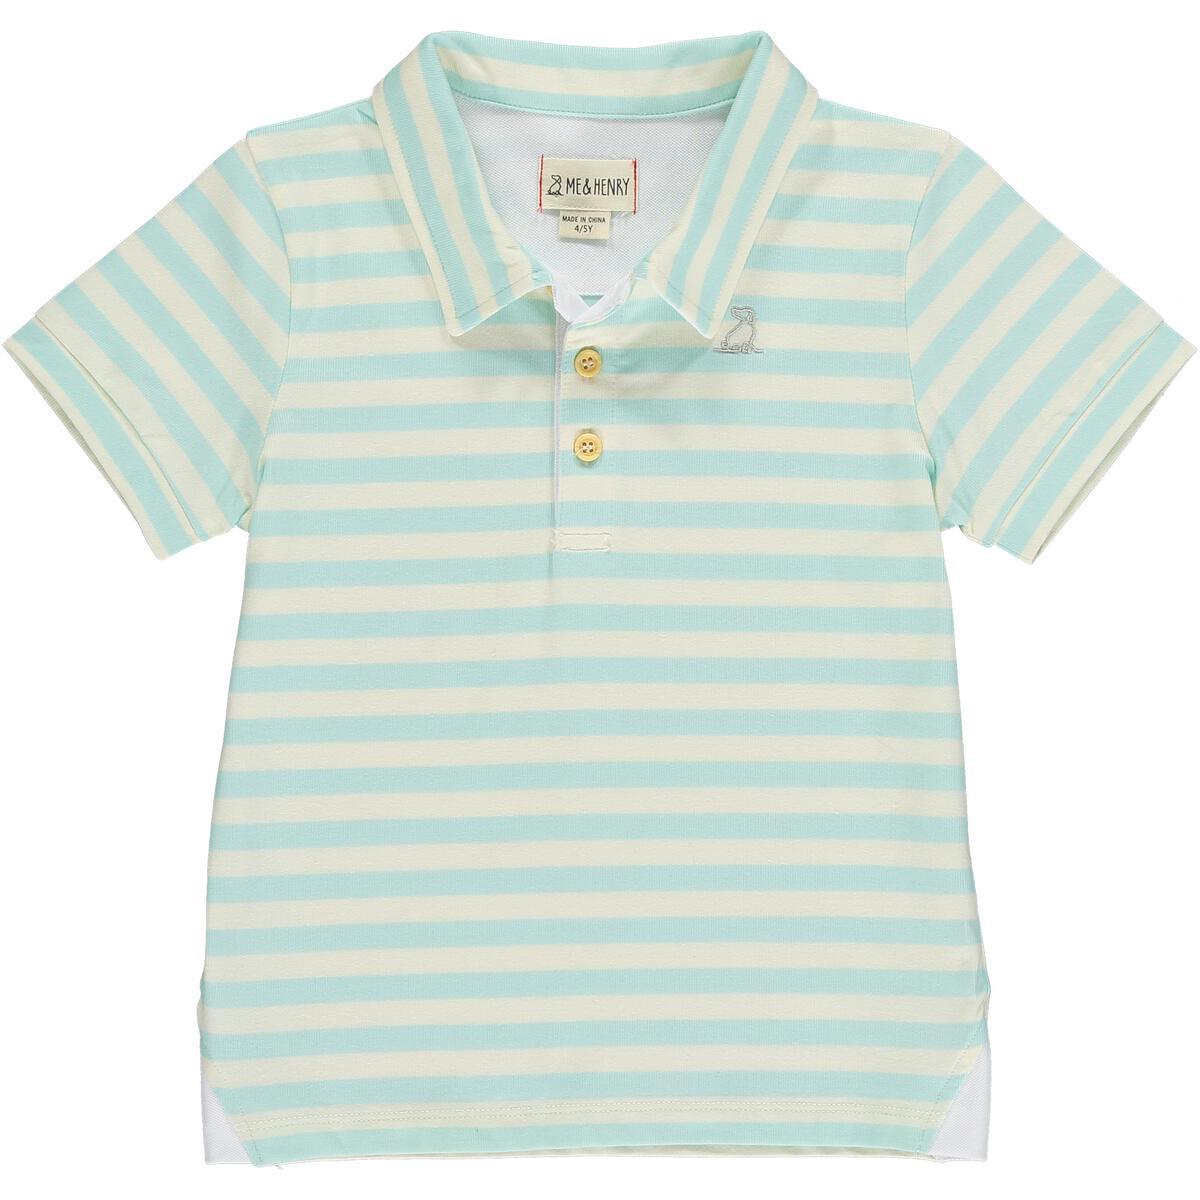 Starboard Polo- Youth